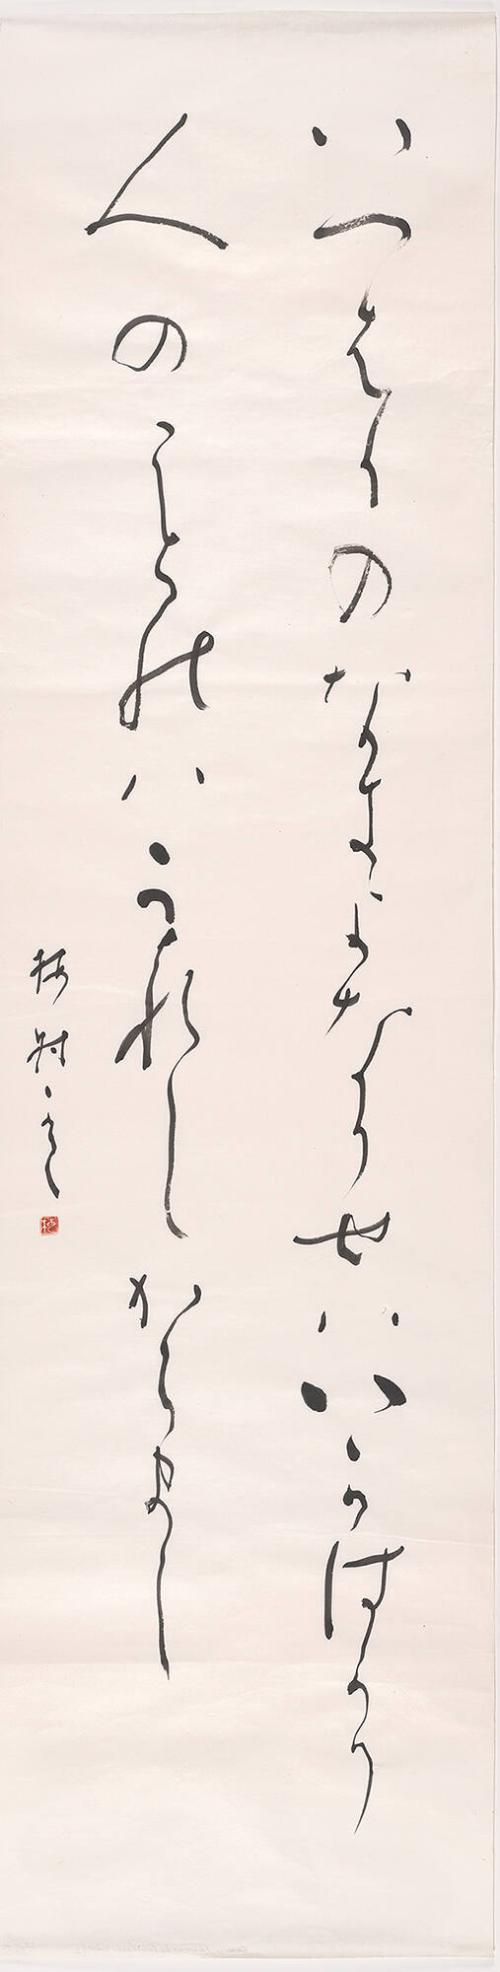 Untitled Calligraphic Drawing